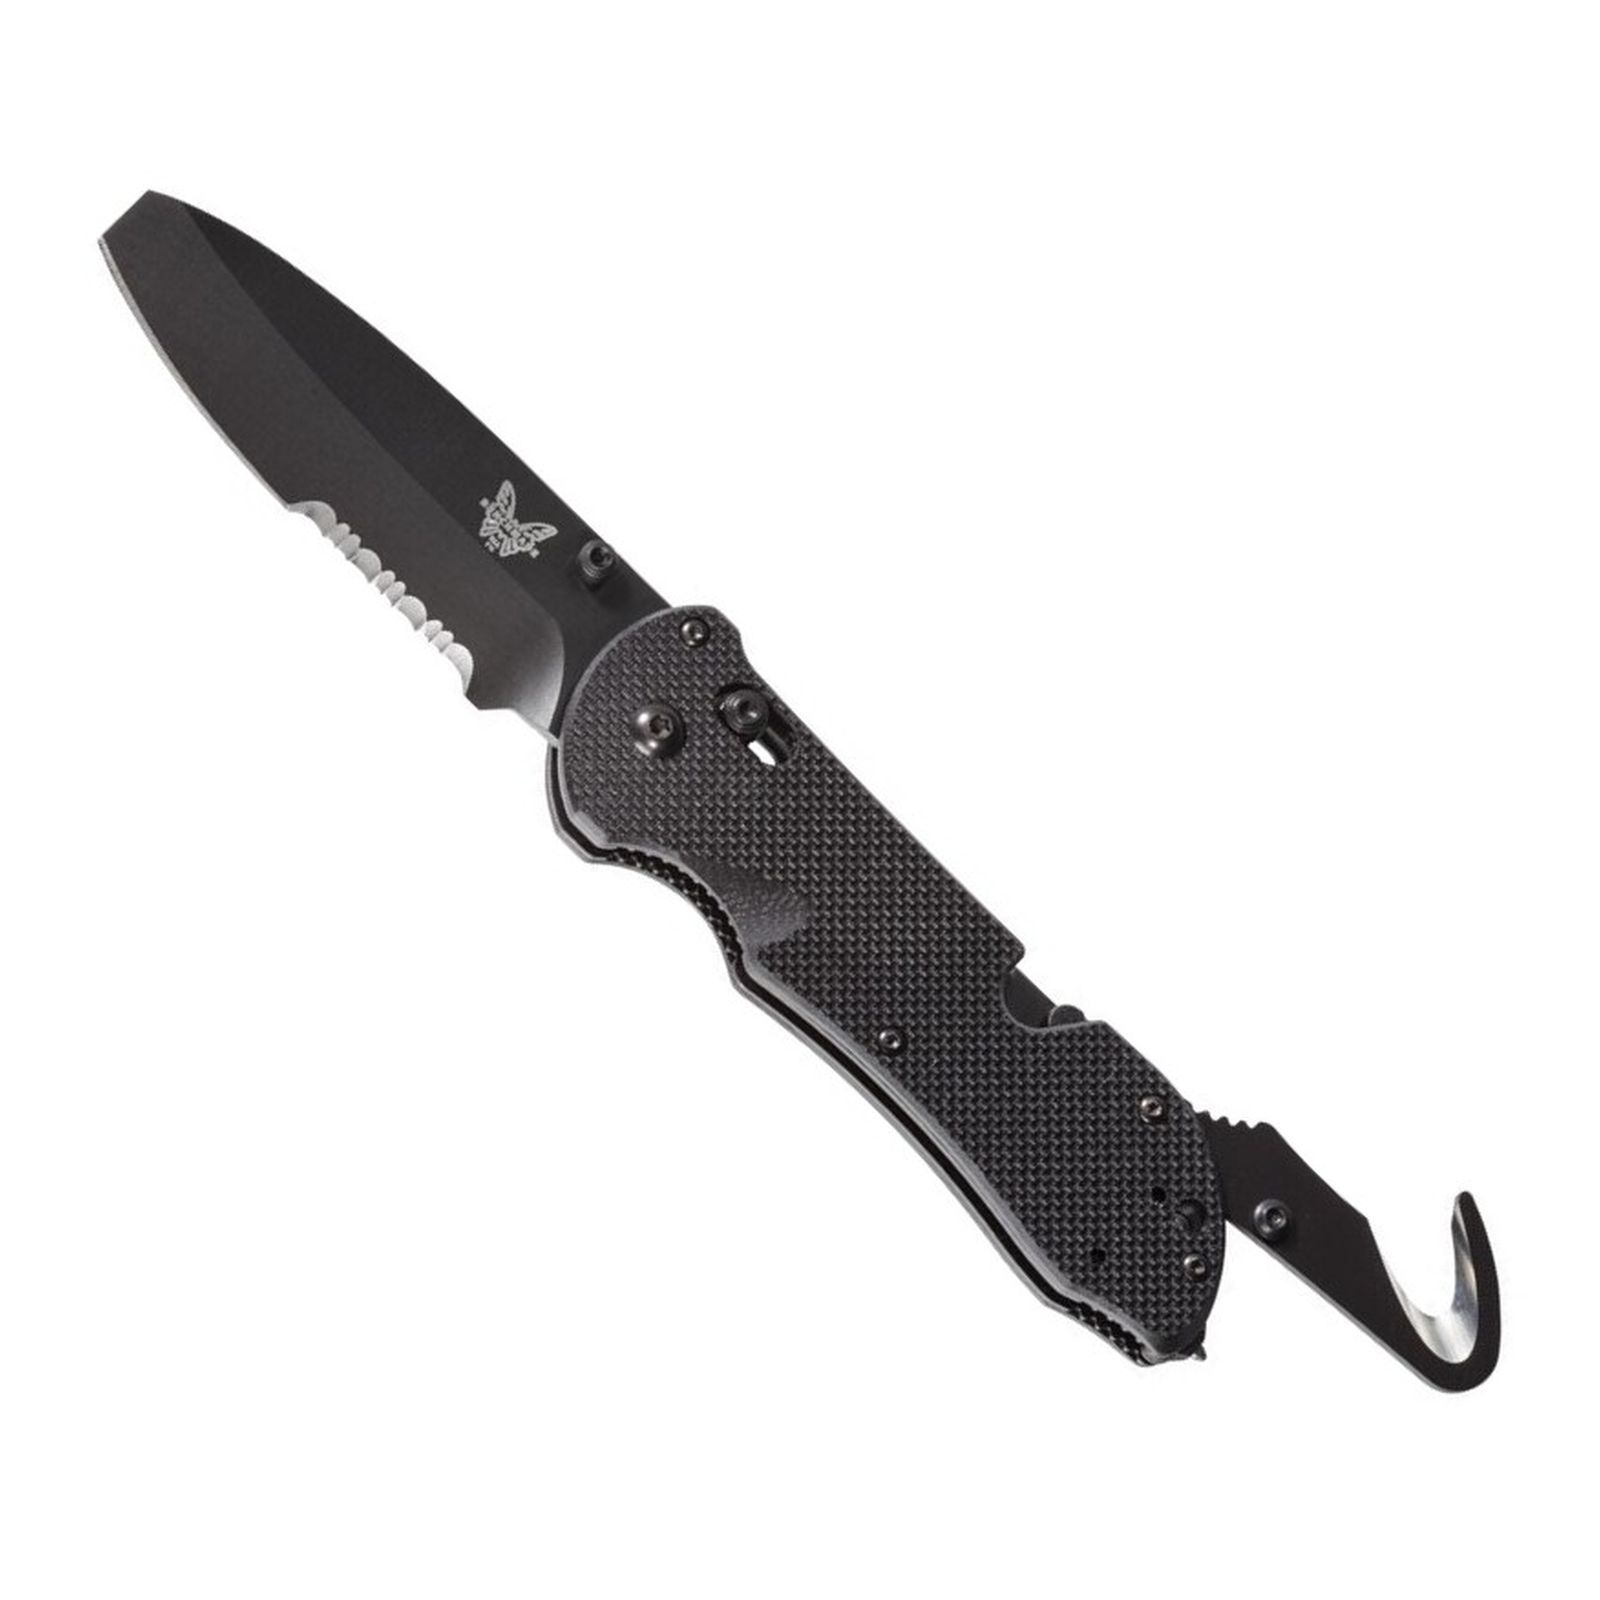 Benchmade Triage Serrated AXIS Lock Folding Knife with Hook - Black